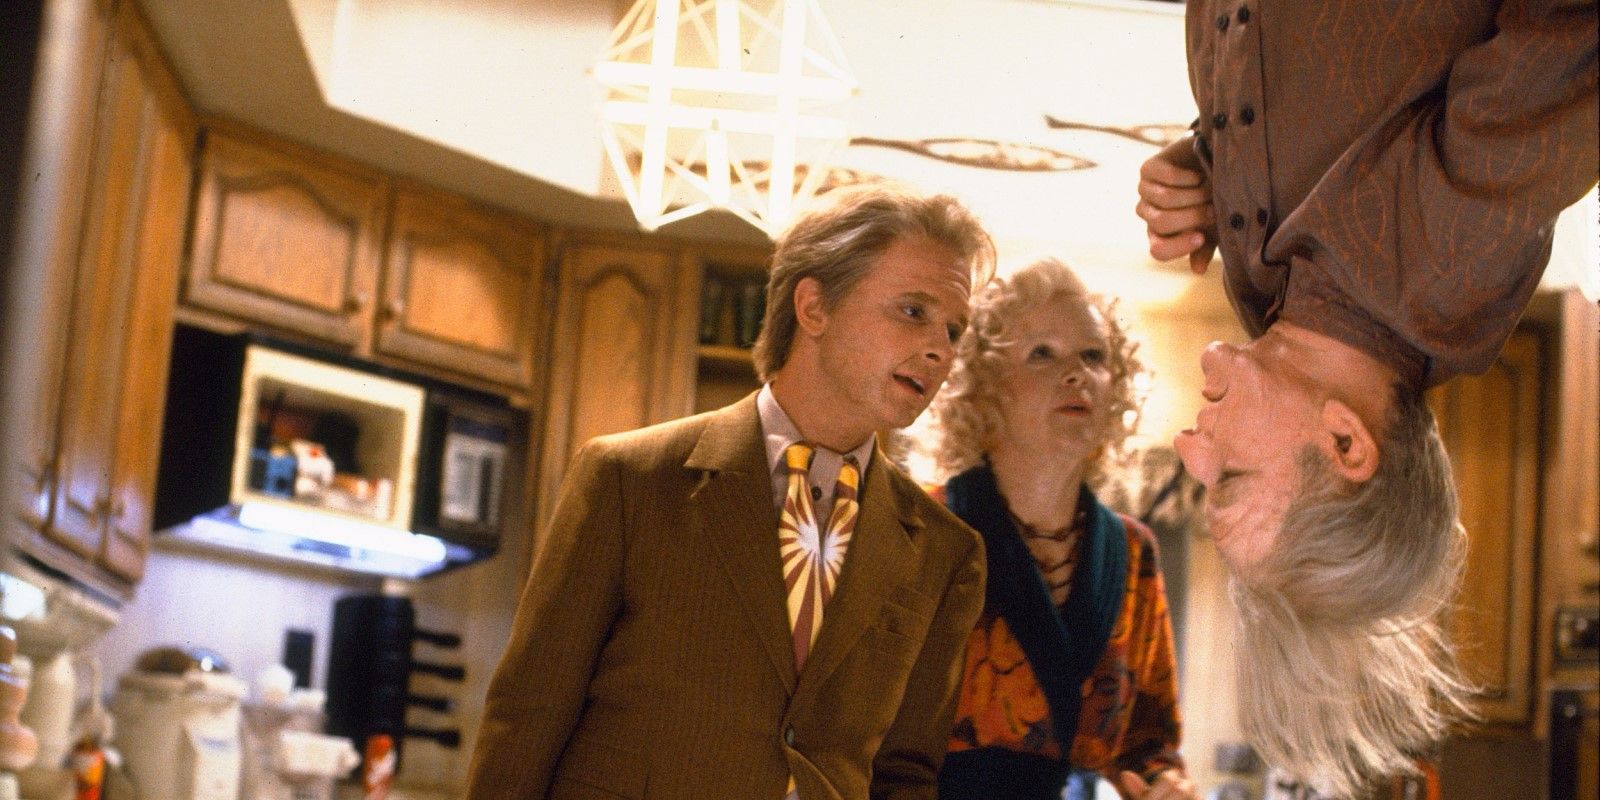 George McFly (Jeffrey Weissman) hangs upside down as Marty (Michael J. Fox) and Lorraine (Lea Thompson) stand beside him in 'Back to the Future Part II'